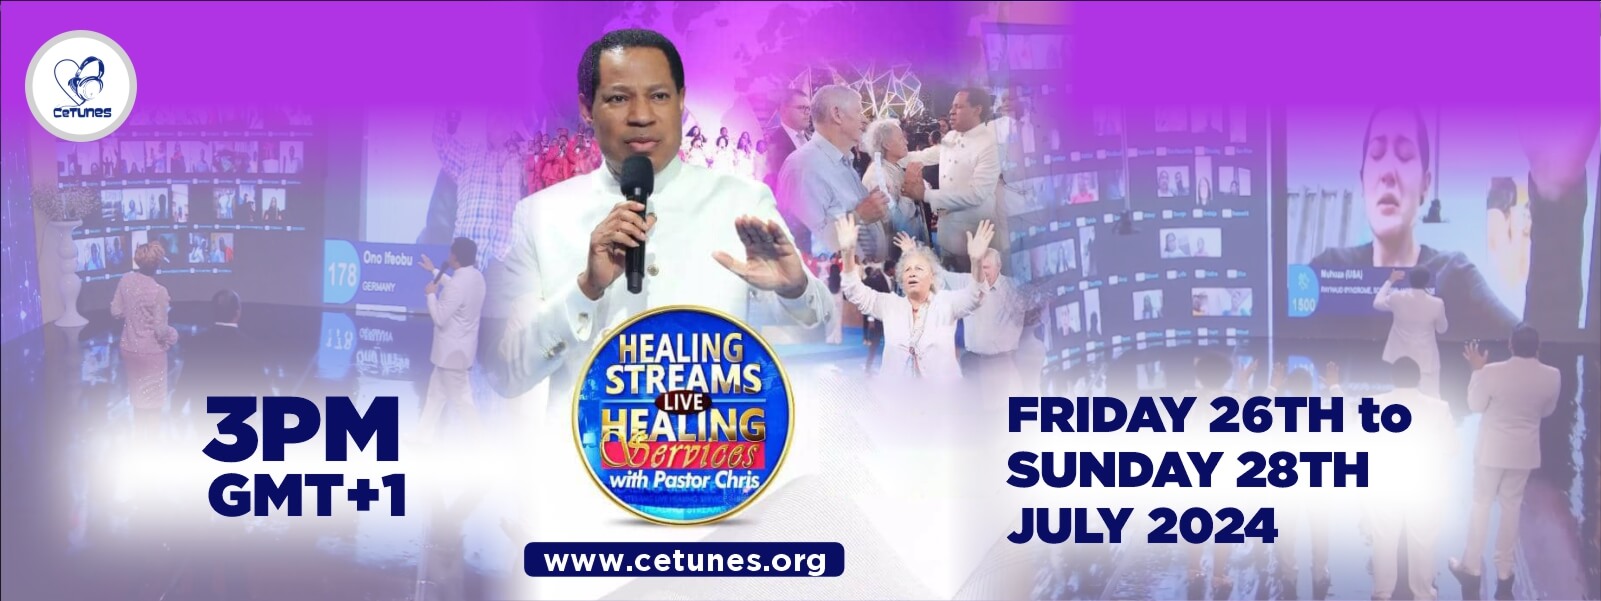 HEALING STREAMS LIVE HEALING SERVICE WITH PASTOR CHRIS 